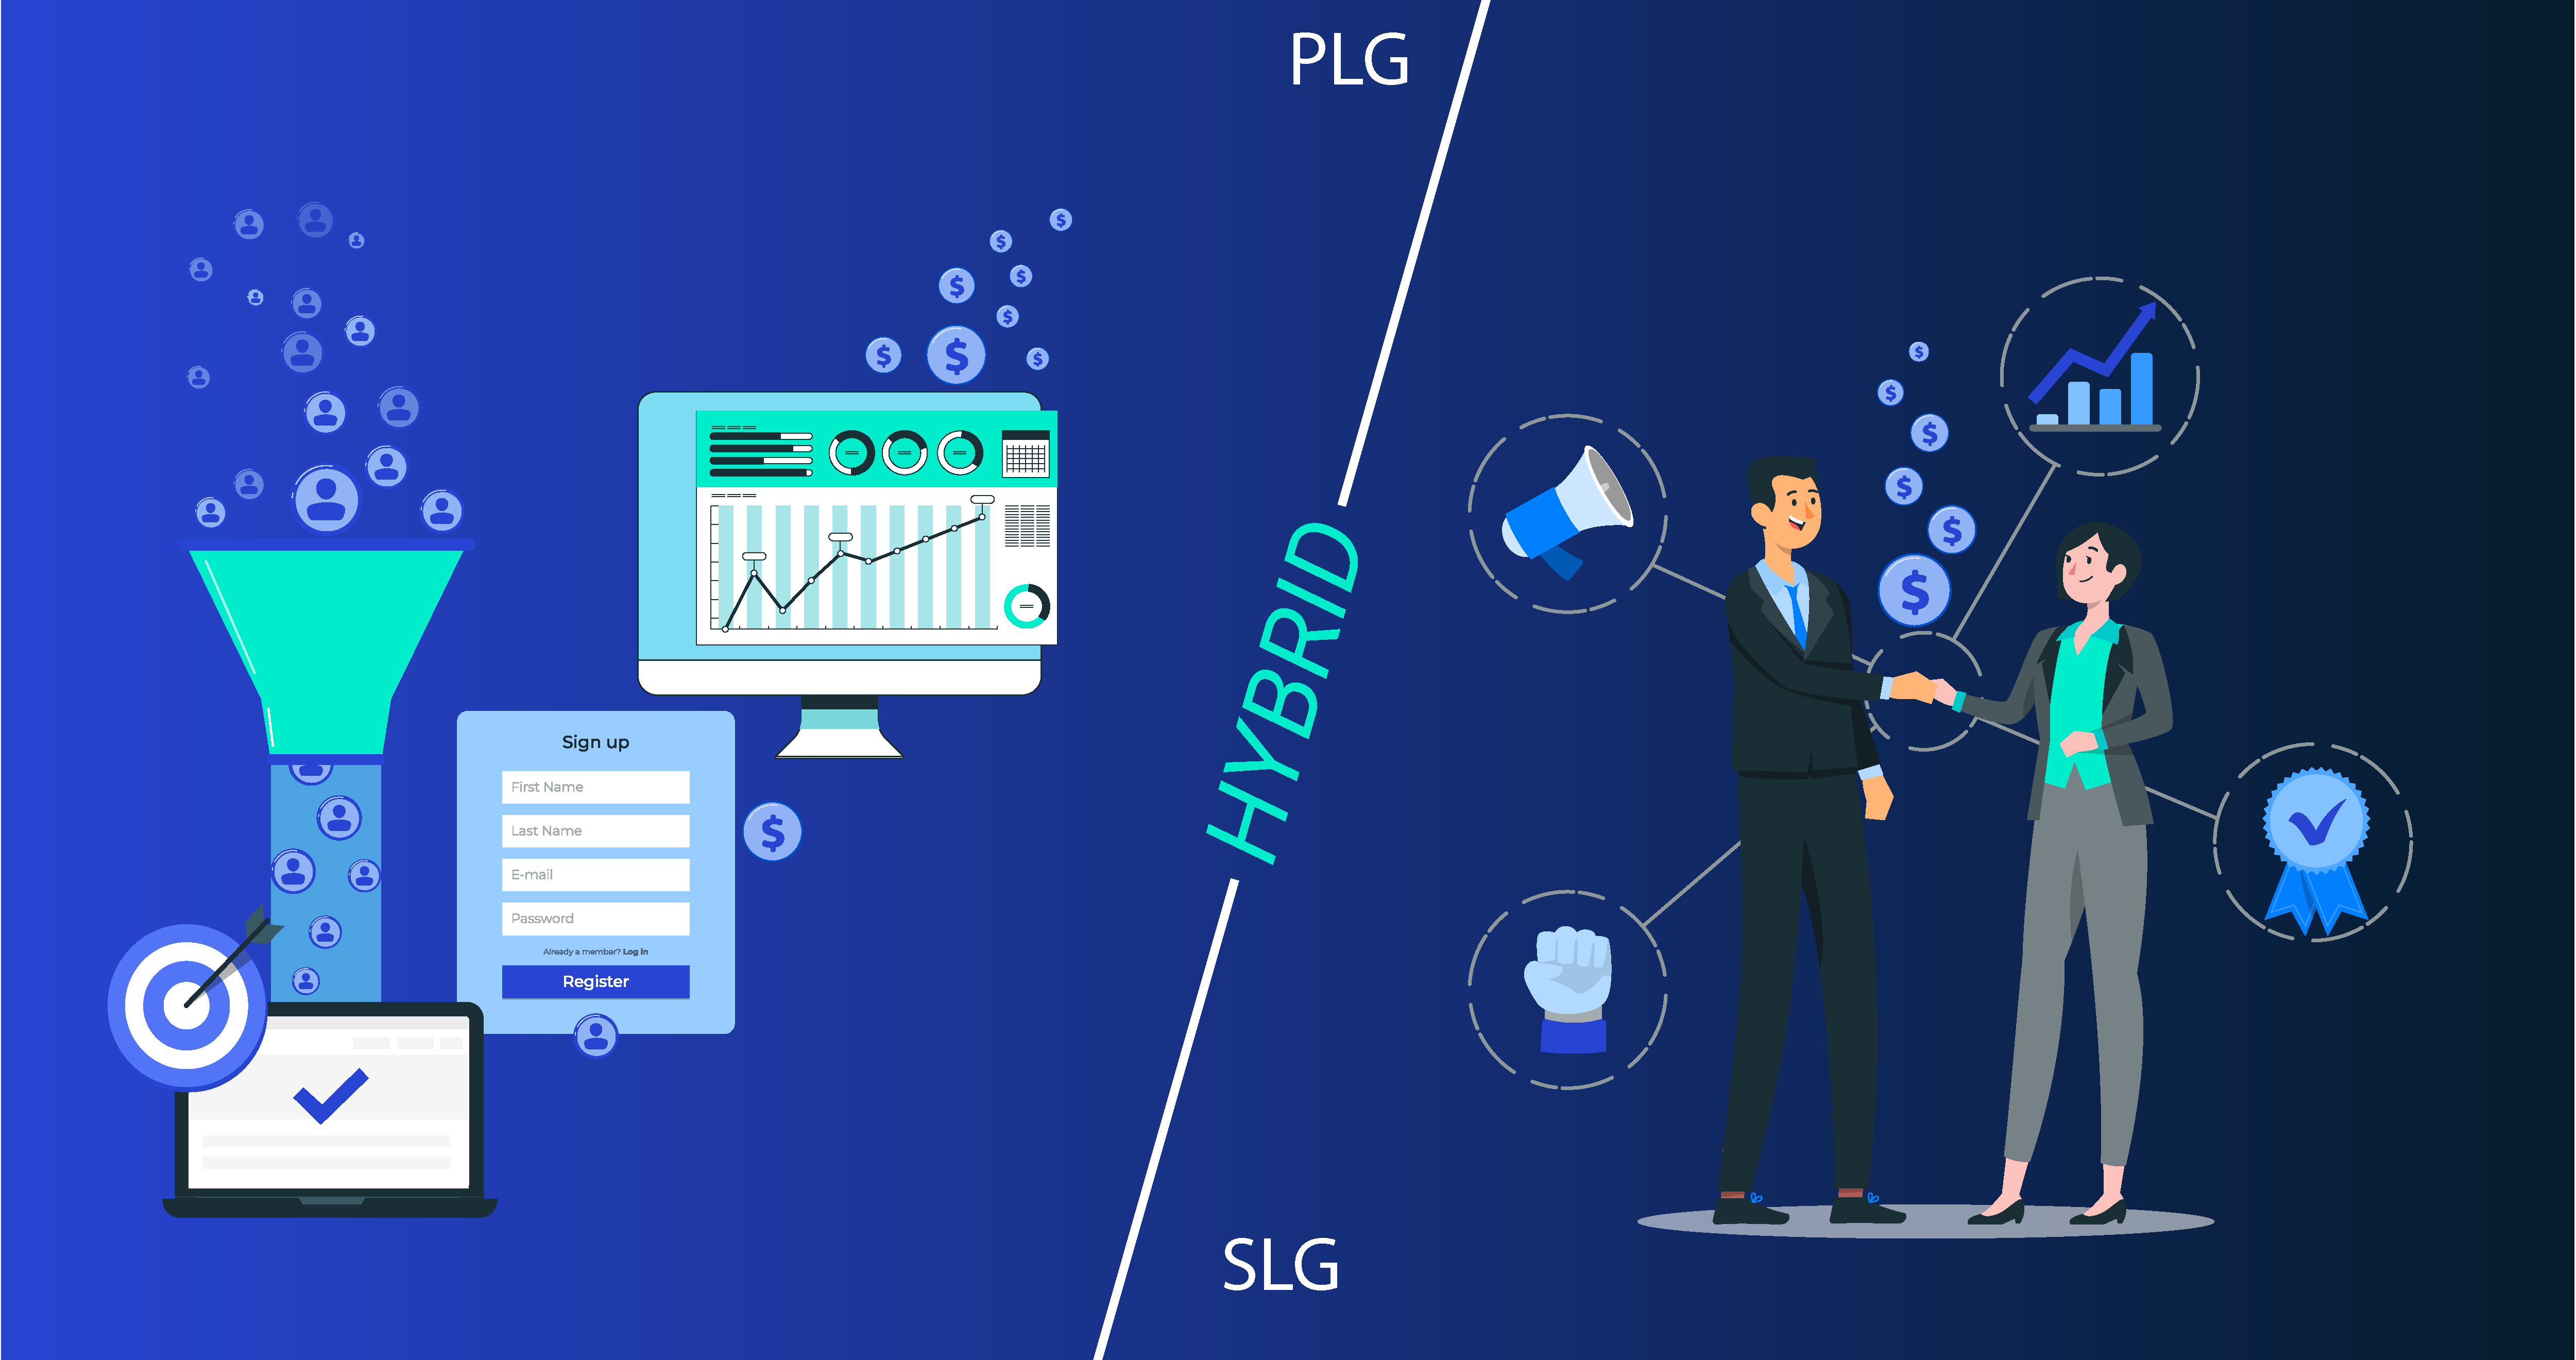 Why Hybrid GTM is Winning Over PLG & SLG and How To Embark On It with Confidence